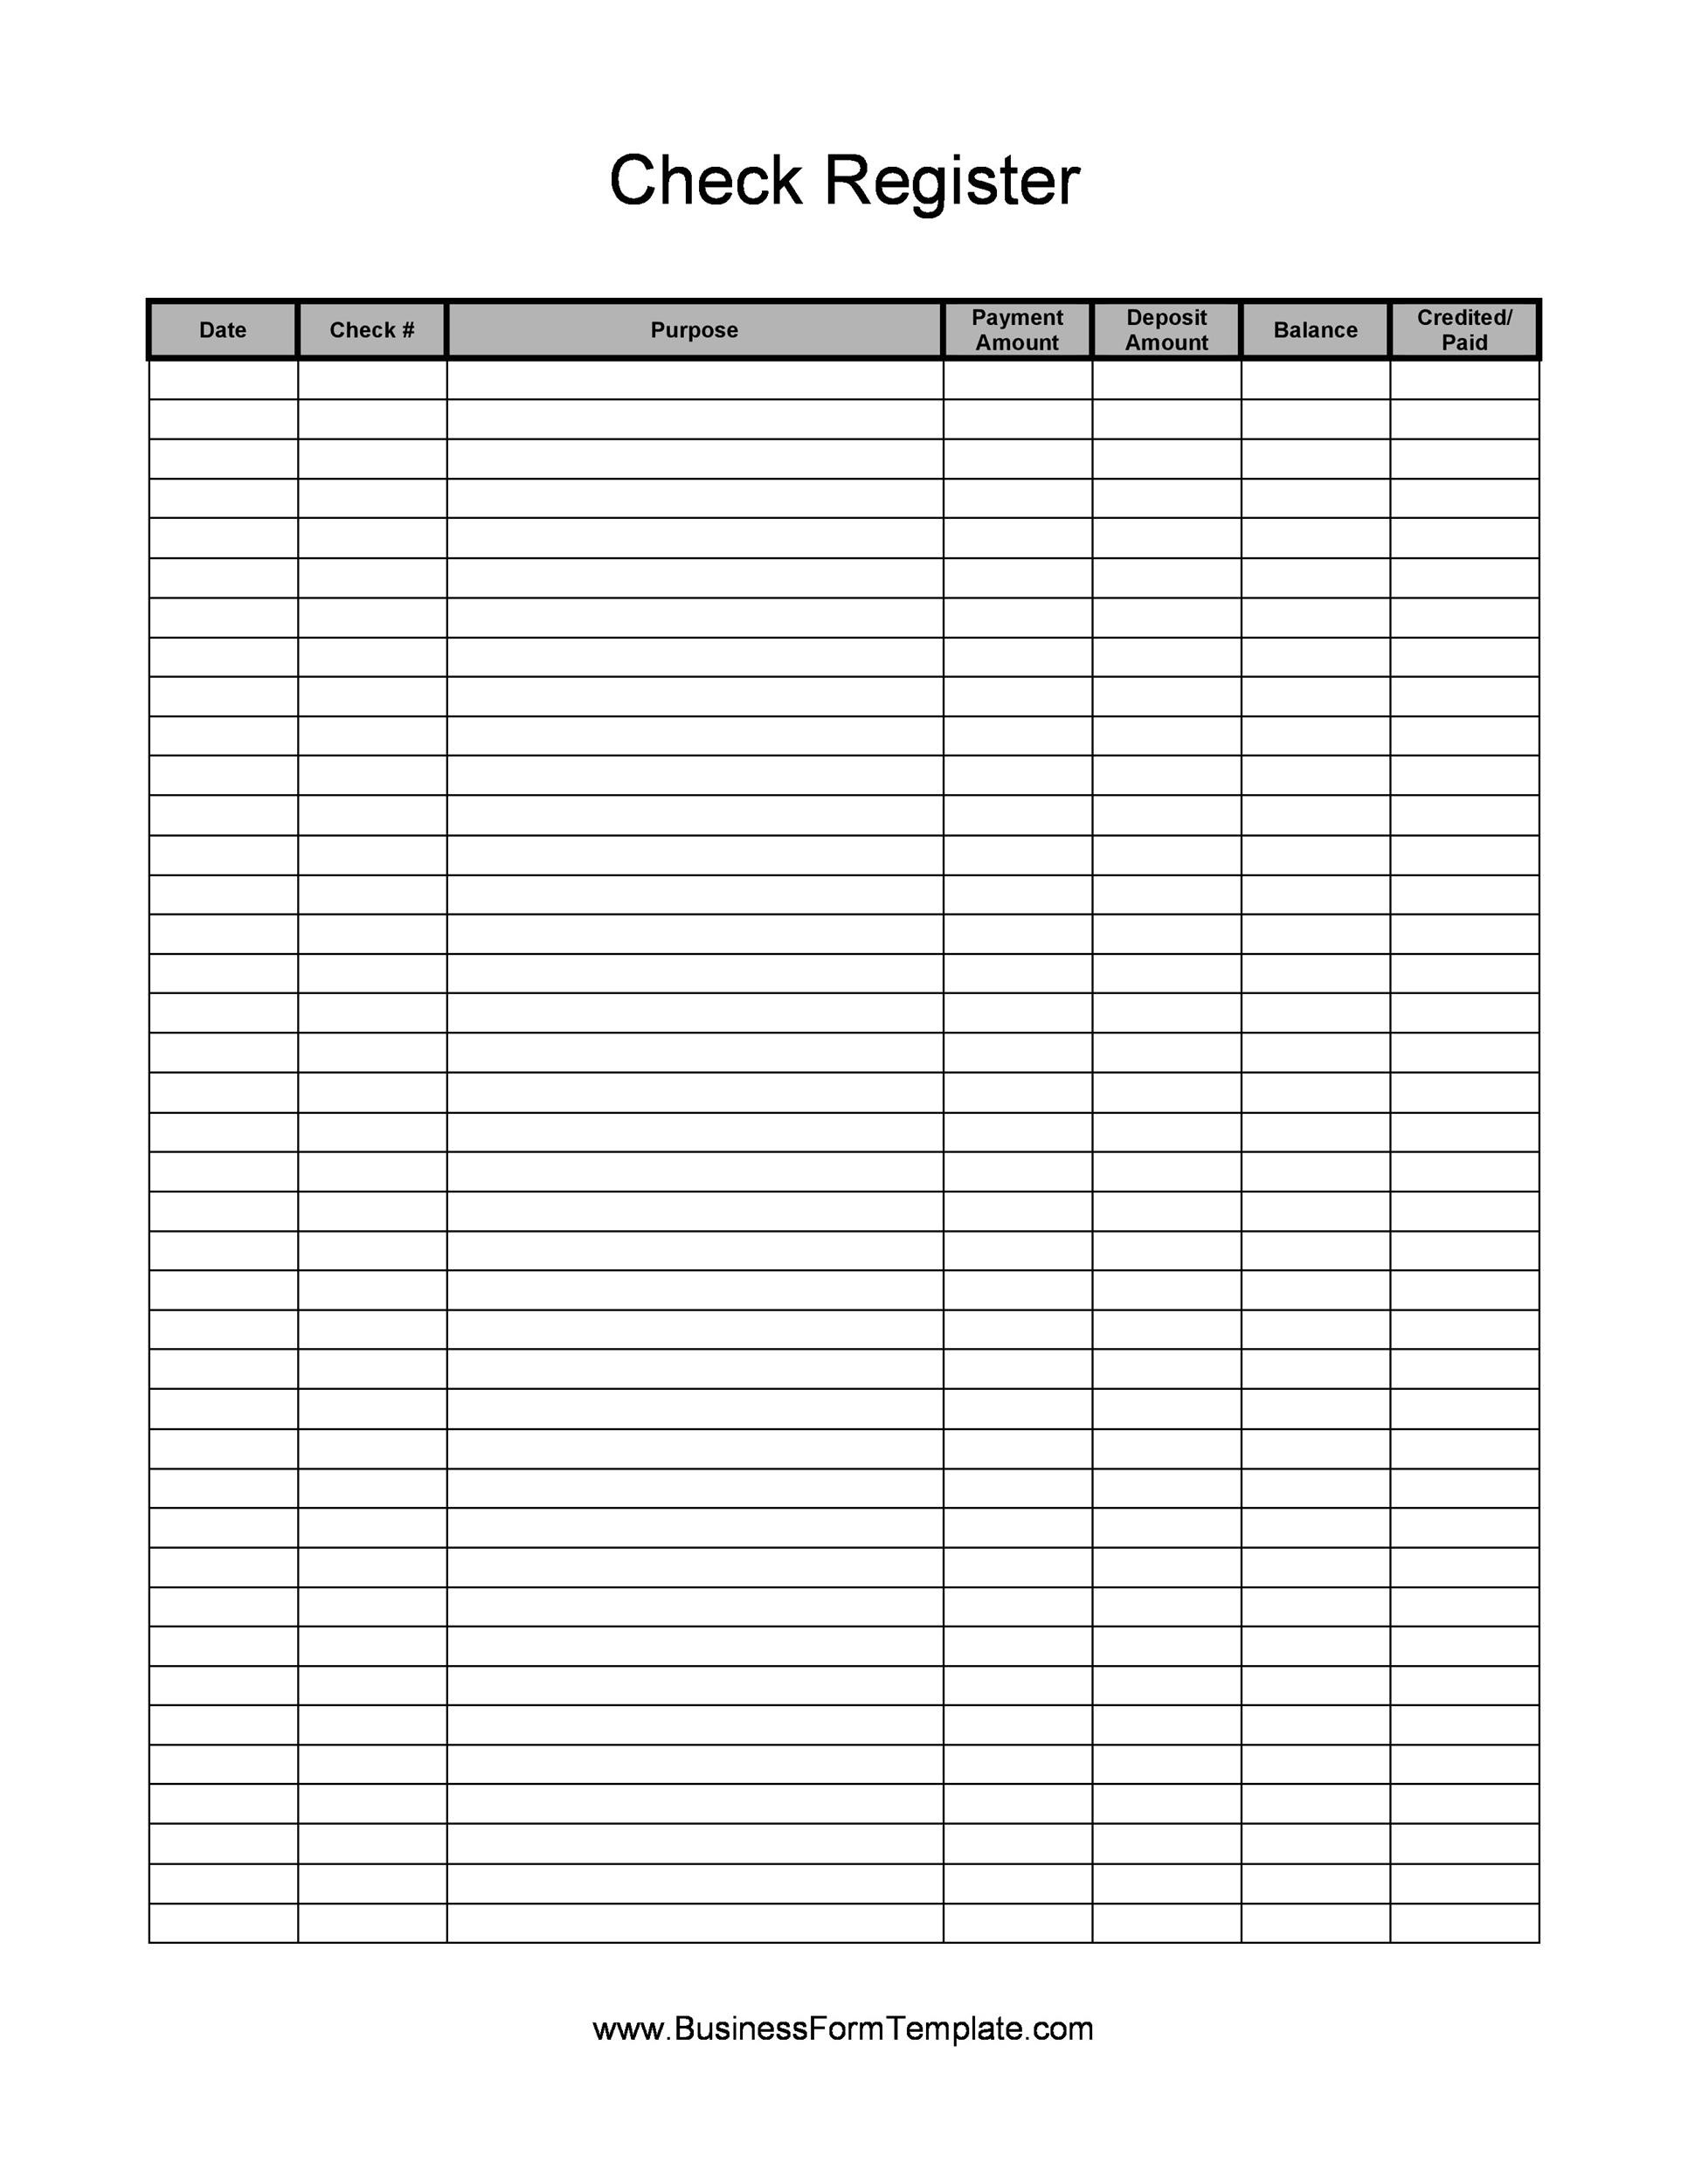 Free Printable Check Register FREE DOWNLOAD Aashe